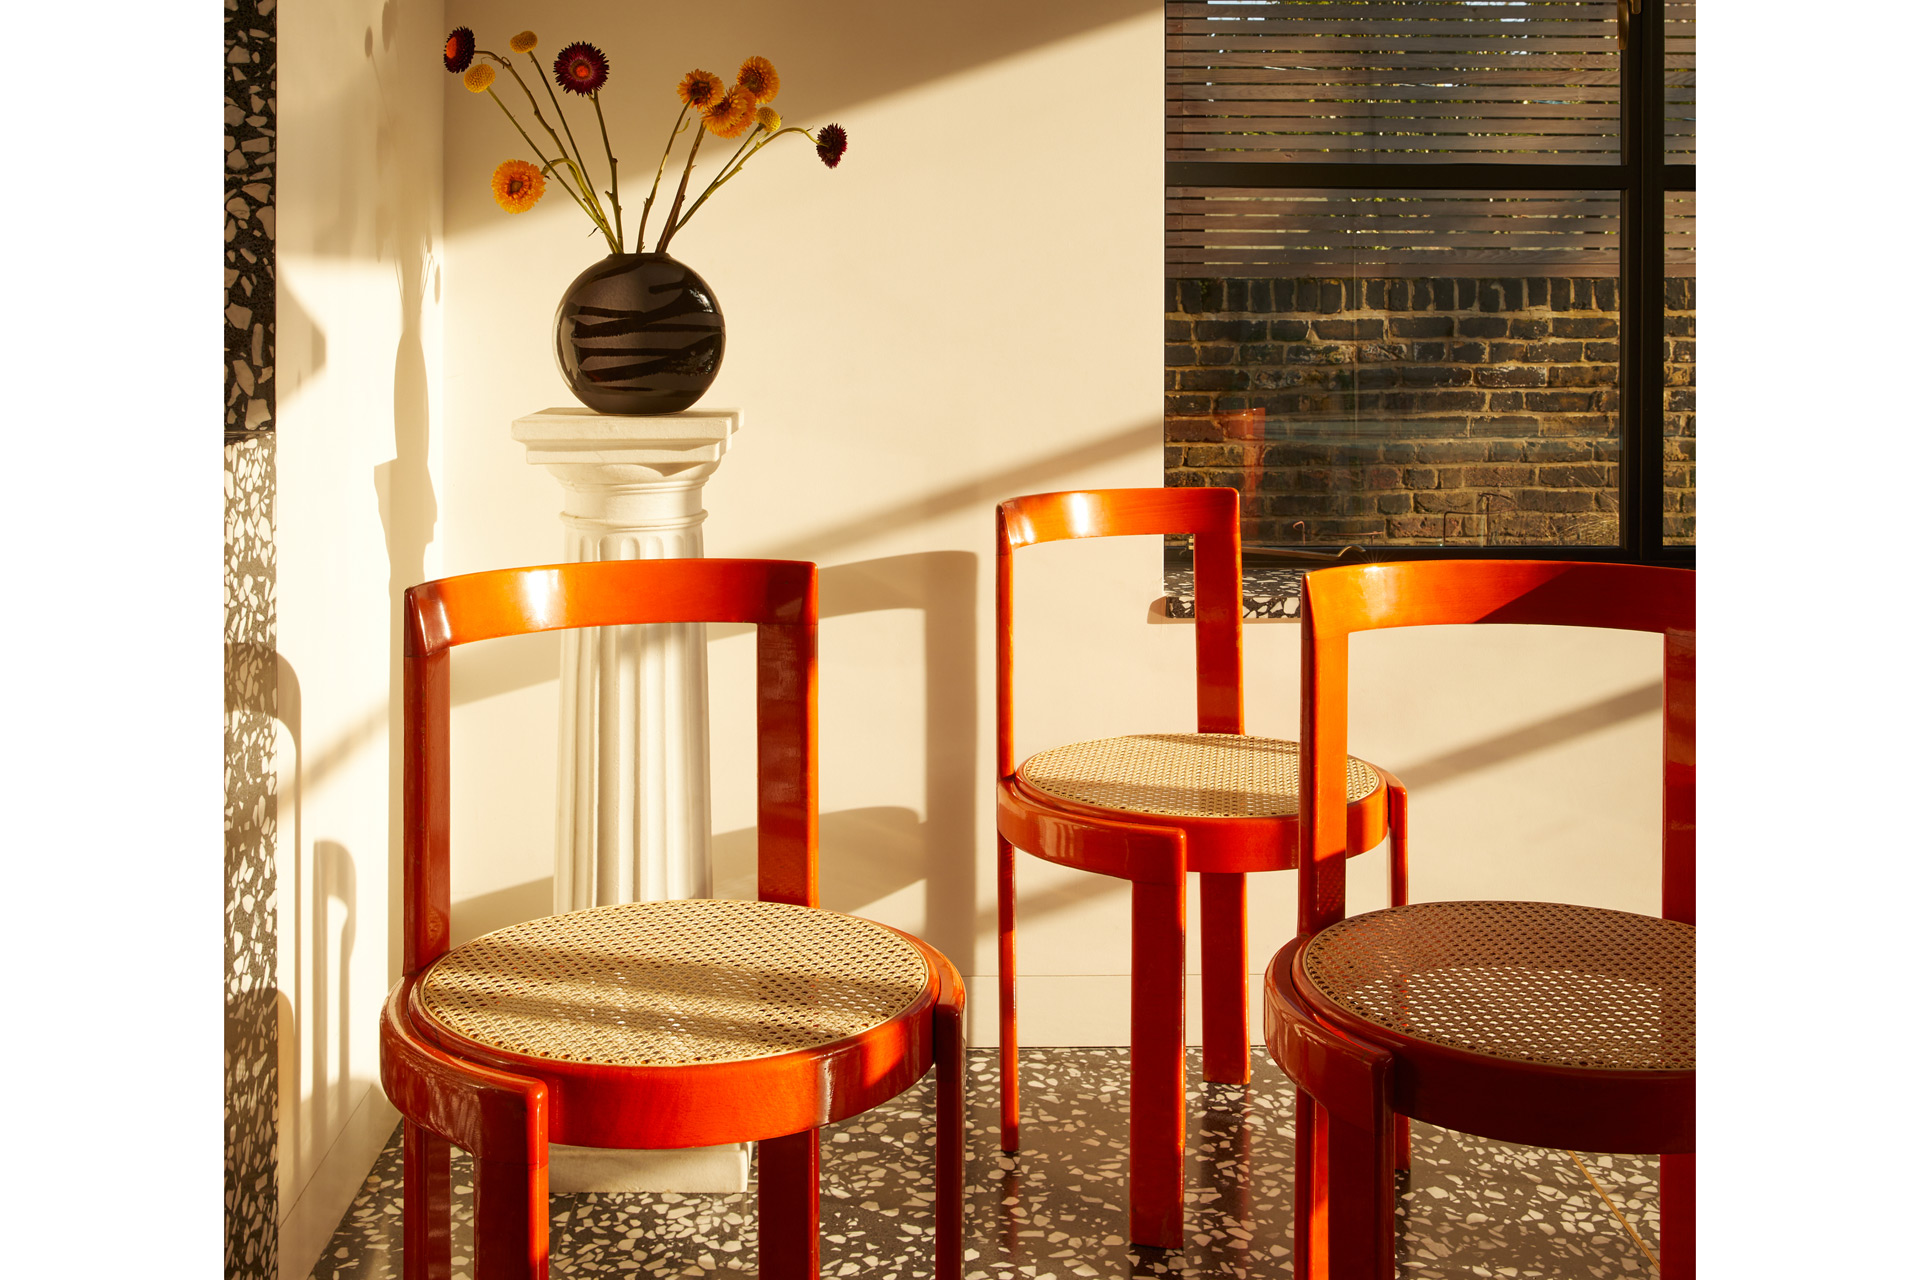 Corner with orange chairs with wicker bases and a circular vase of flowers behind